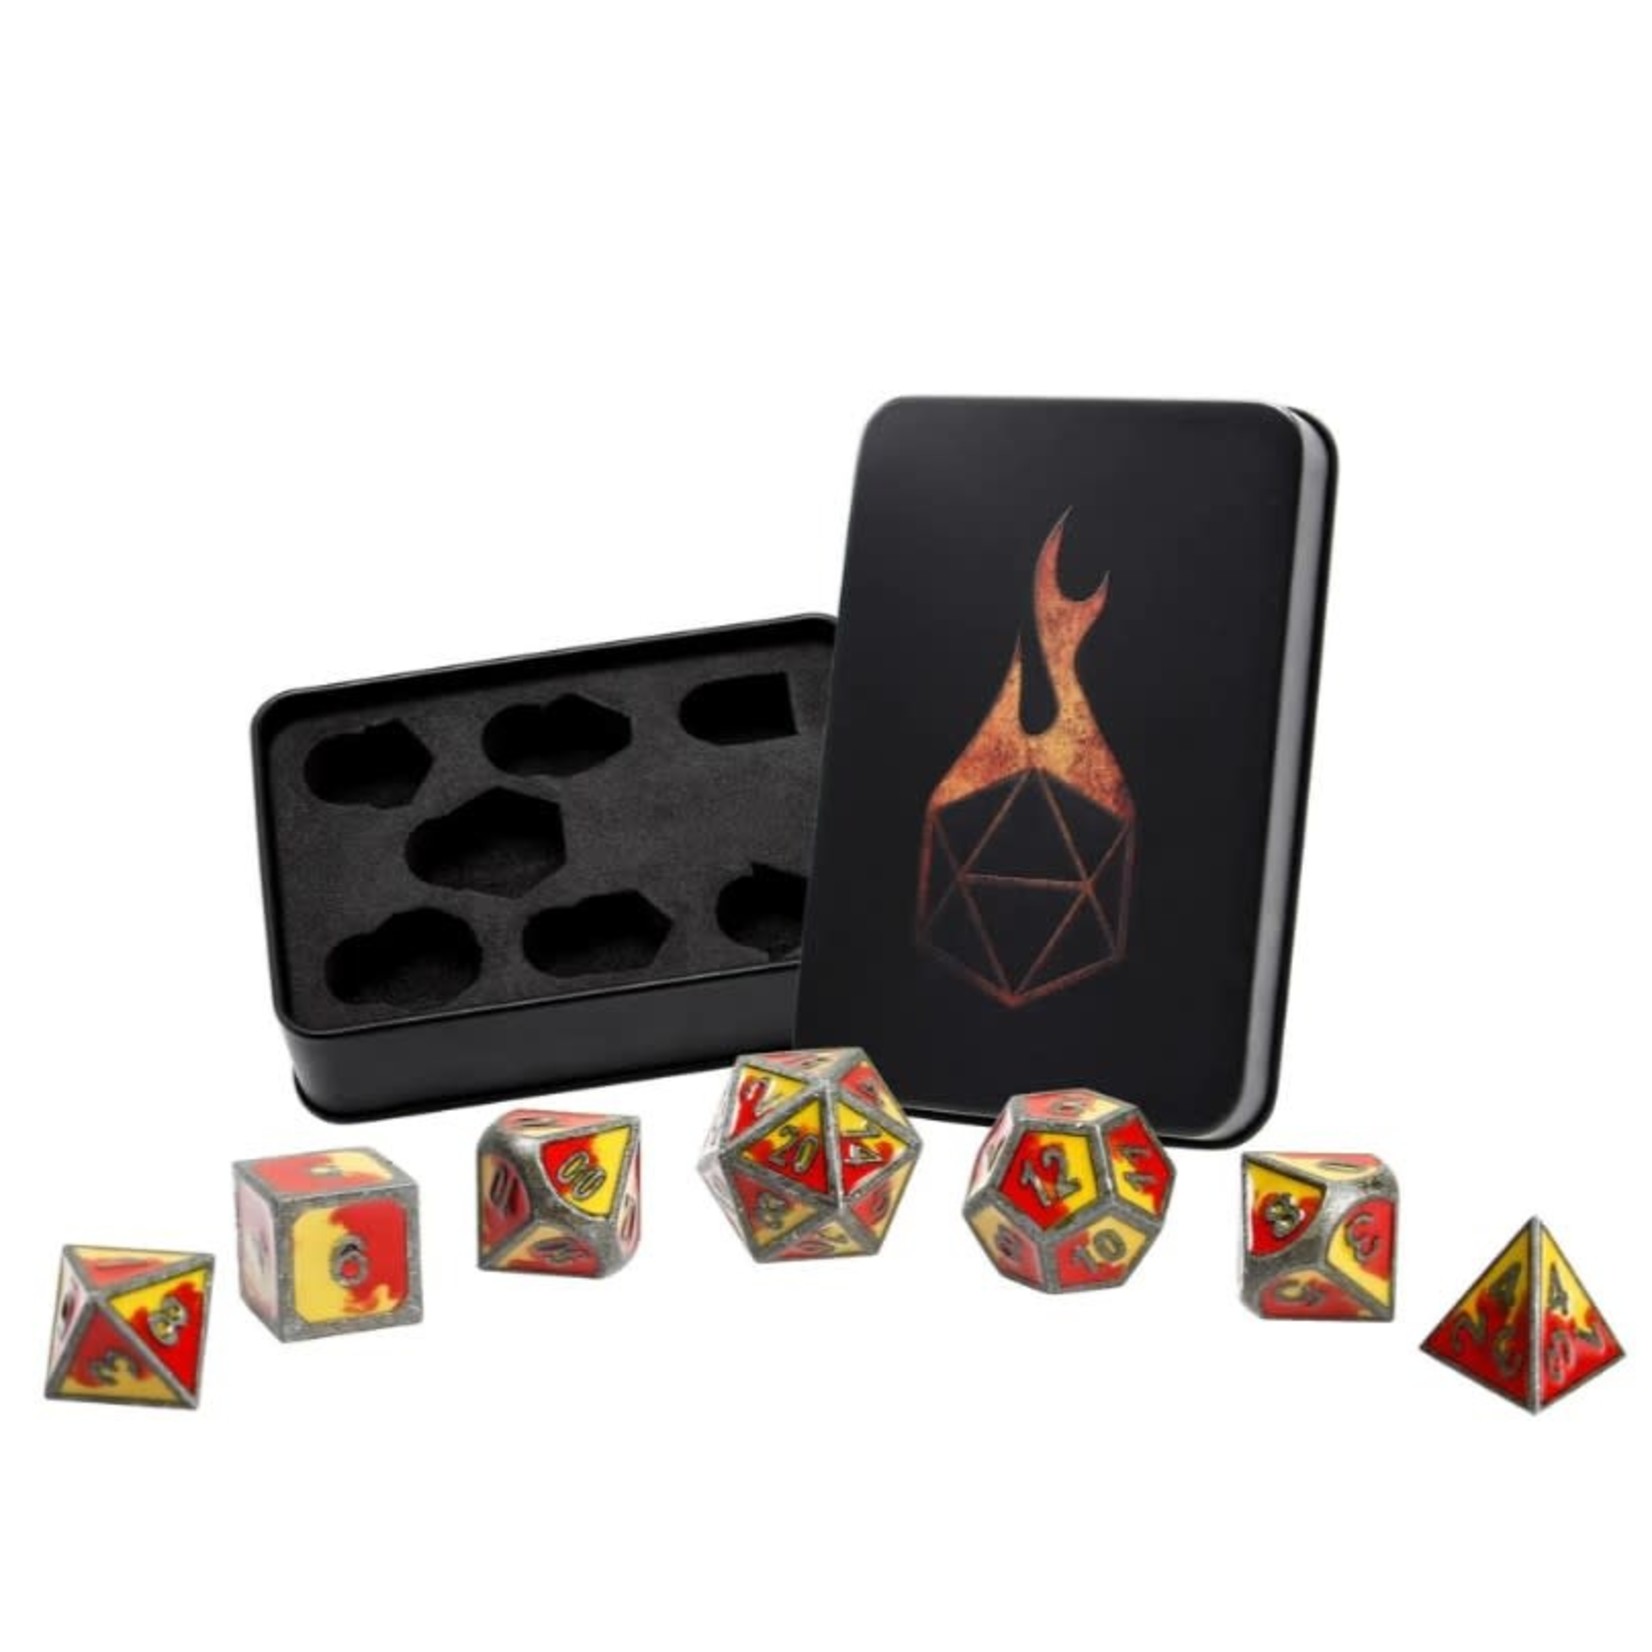 Forged Gaming Set of 7 Metal Dice: Fire & Forge